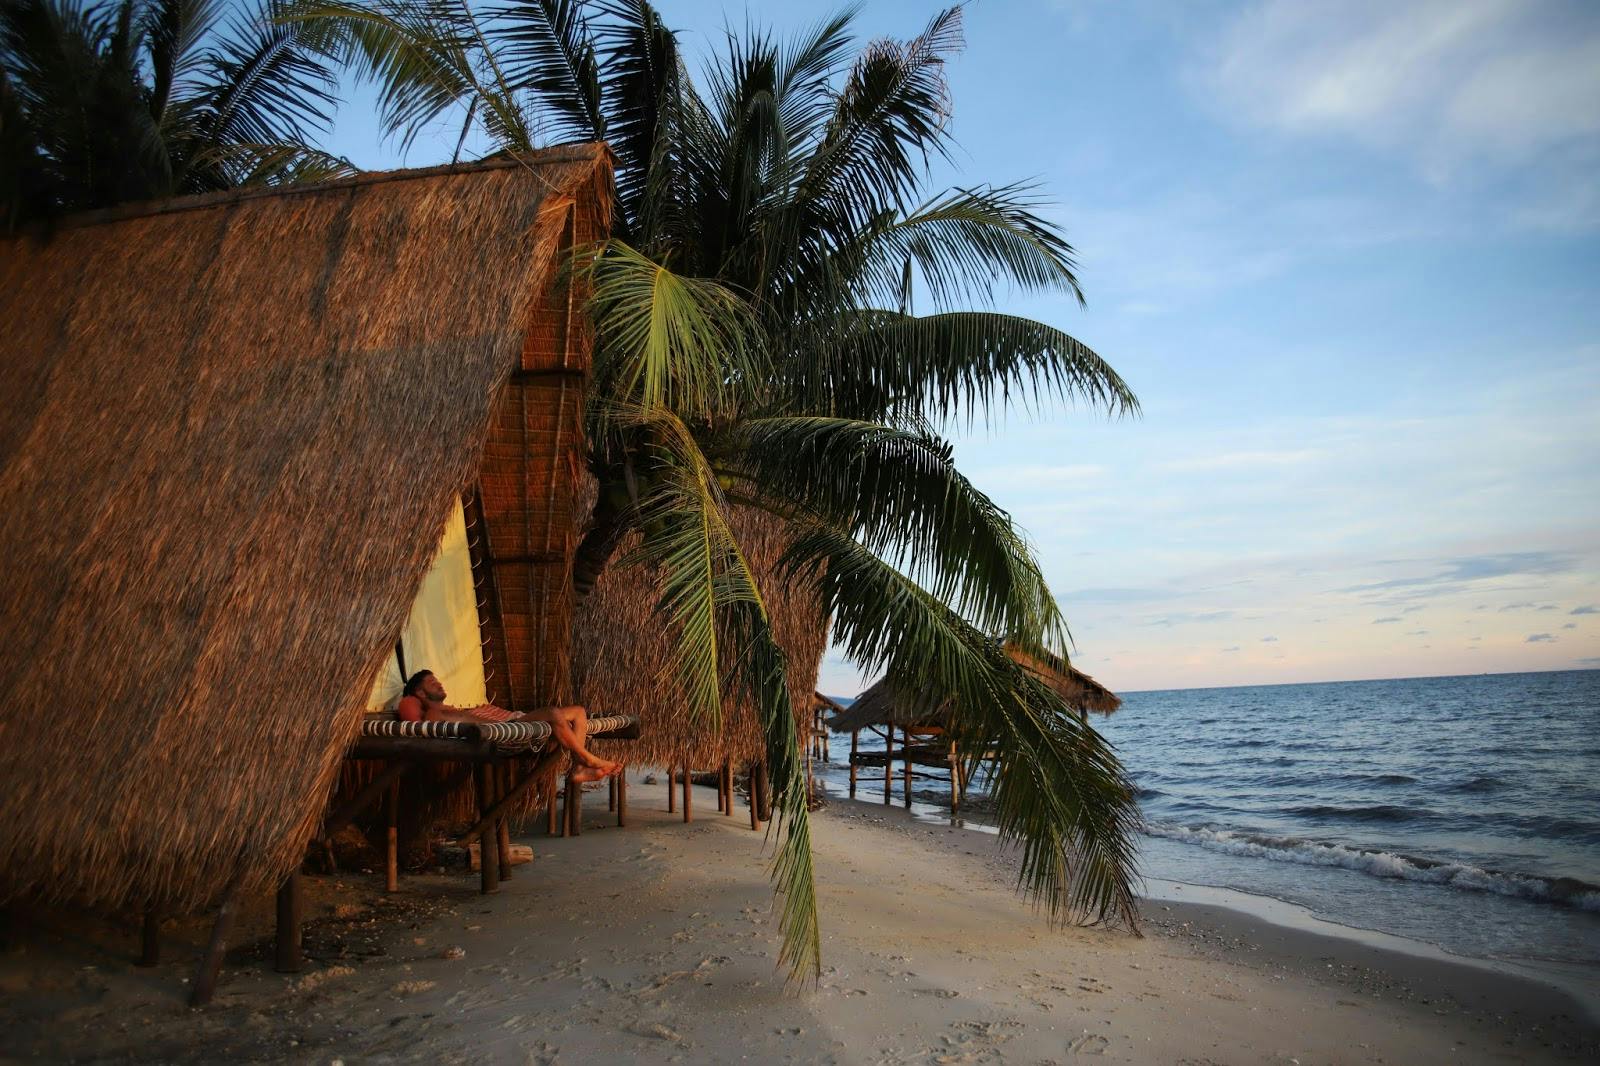 Image - Young Wild and Free - beach bar restaurant and bamboo huts